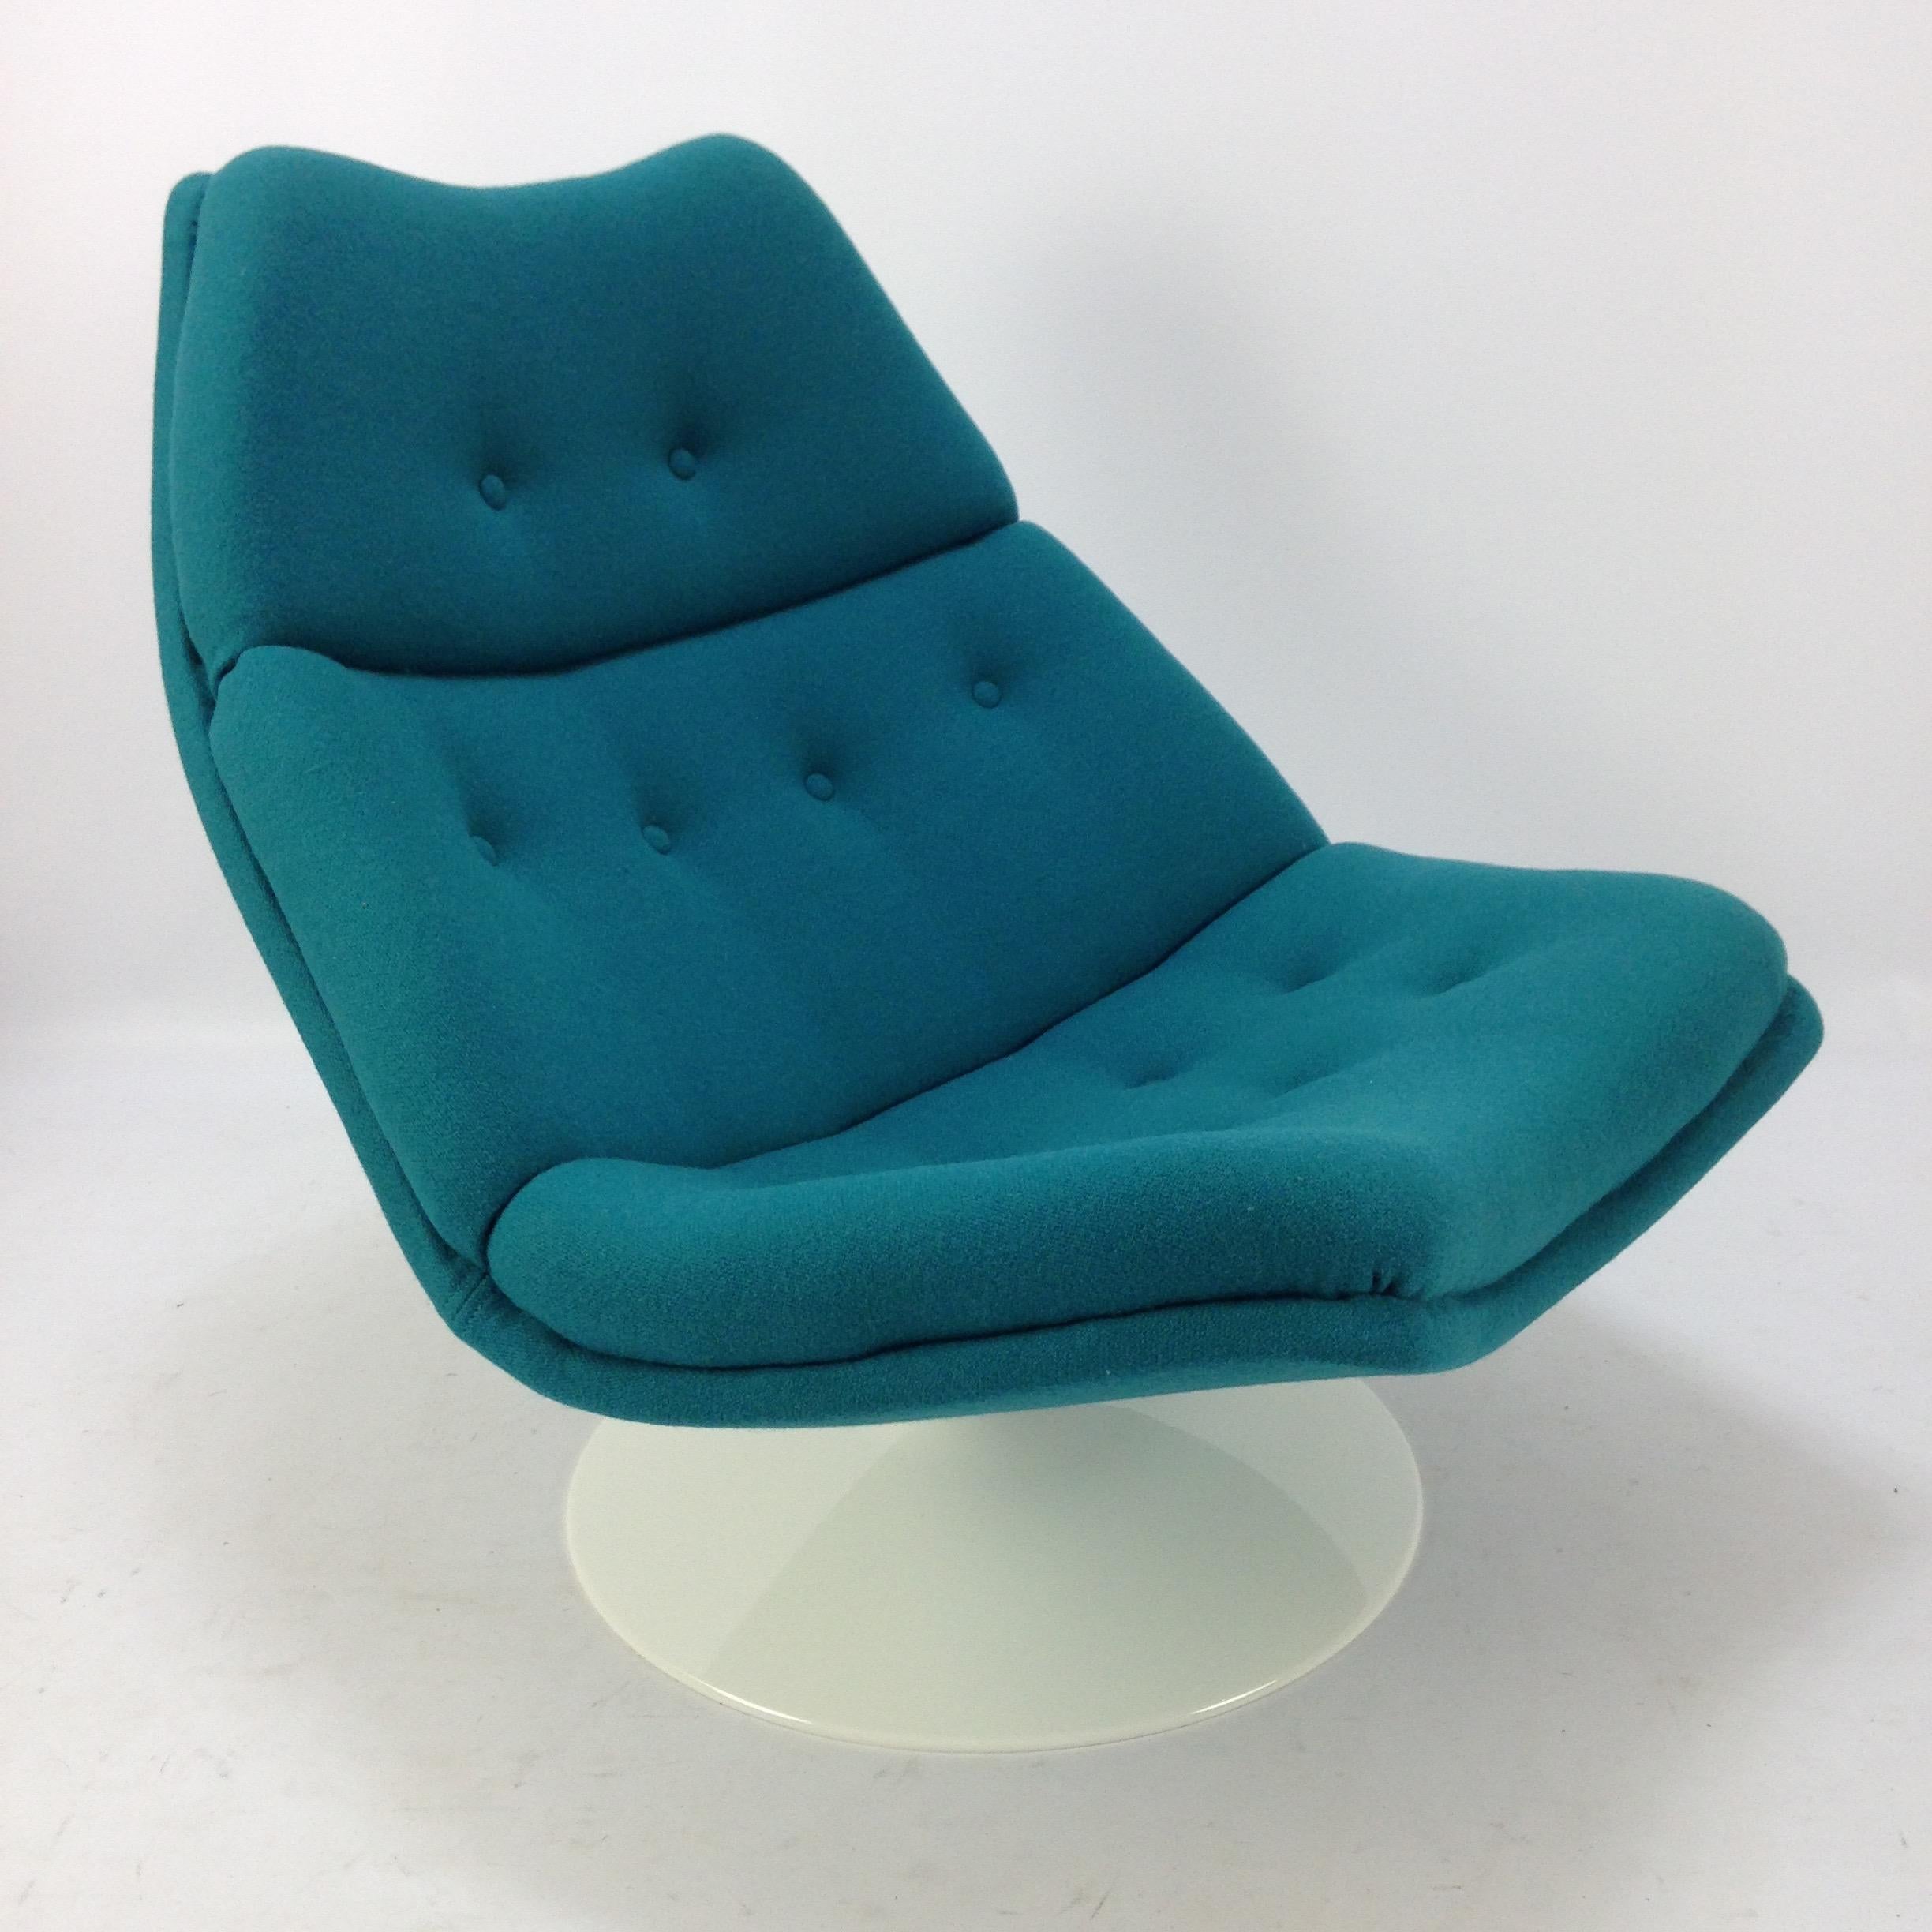 Very comfortable Artifort lounge chair. Designed by the famous English designer Geoffrey Harcourt in the 60's. Reupholstered with high quality wool fabric, Kvadrat Tonus. The foot has been painted by a professional painter. The chair is in perfect